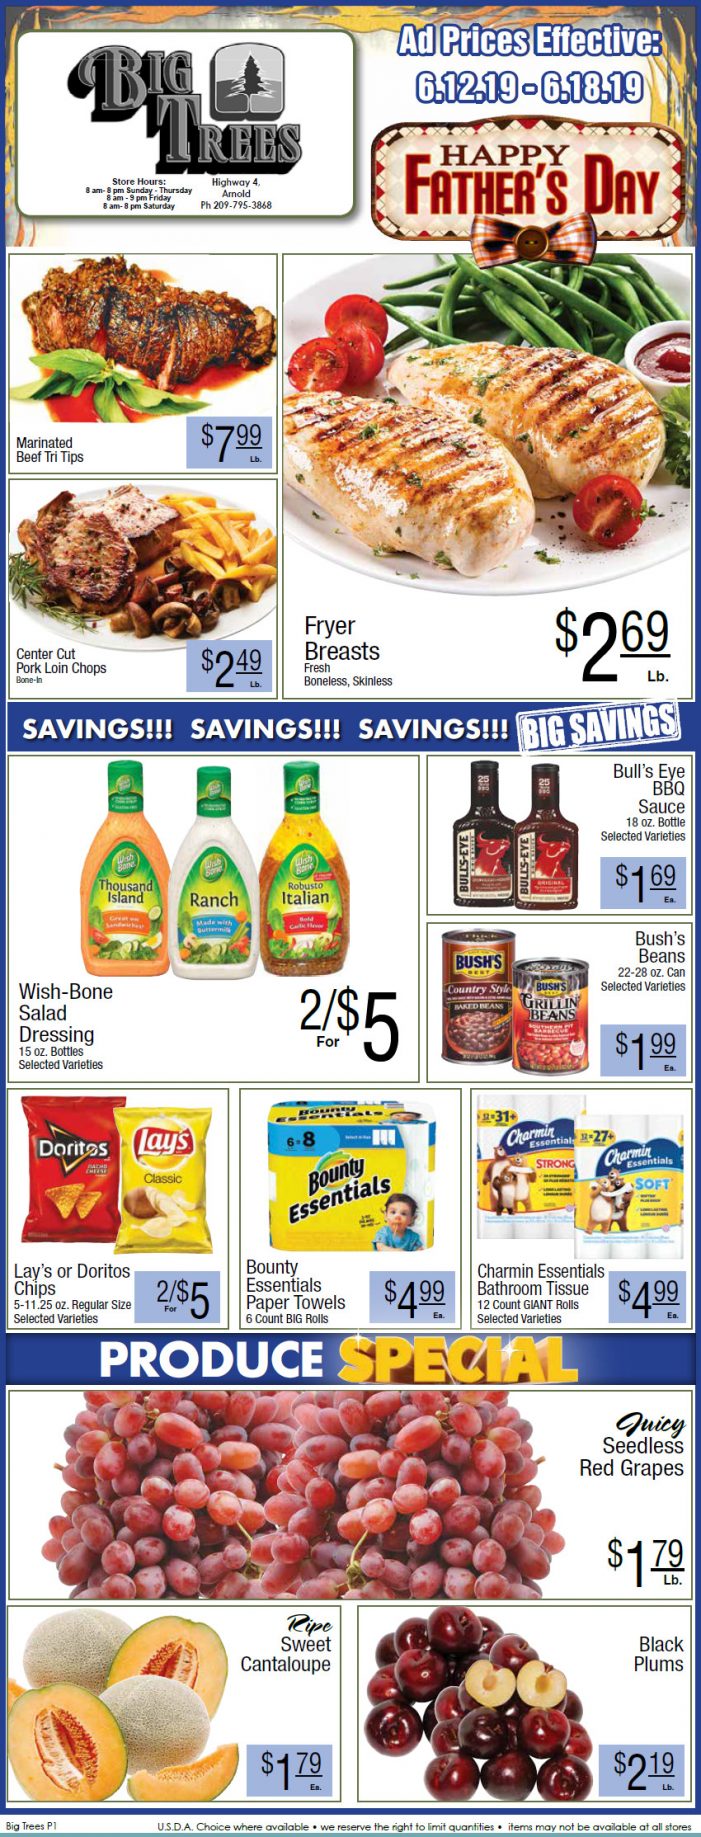 Big Trees Market Weekly Ad & Grocery Specials Through June 18th